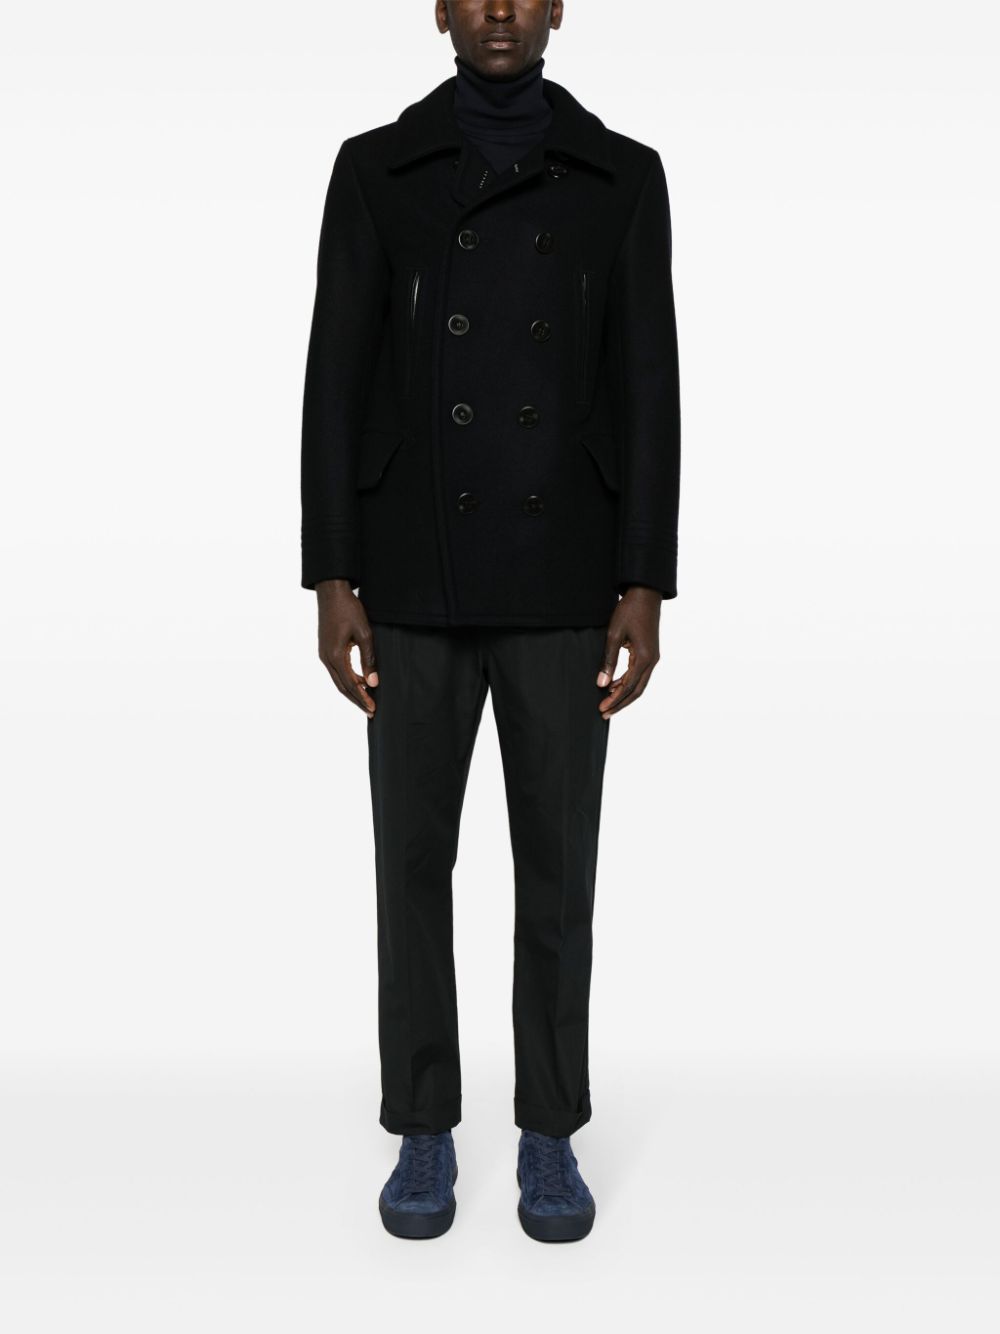 TOM FORD Melton double-breasted Peacoat - Farfetch